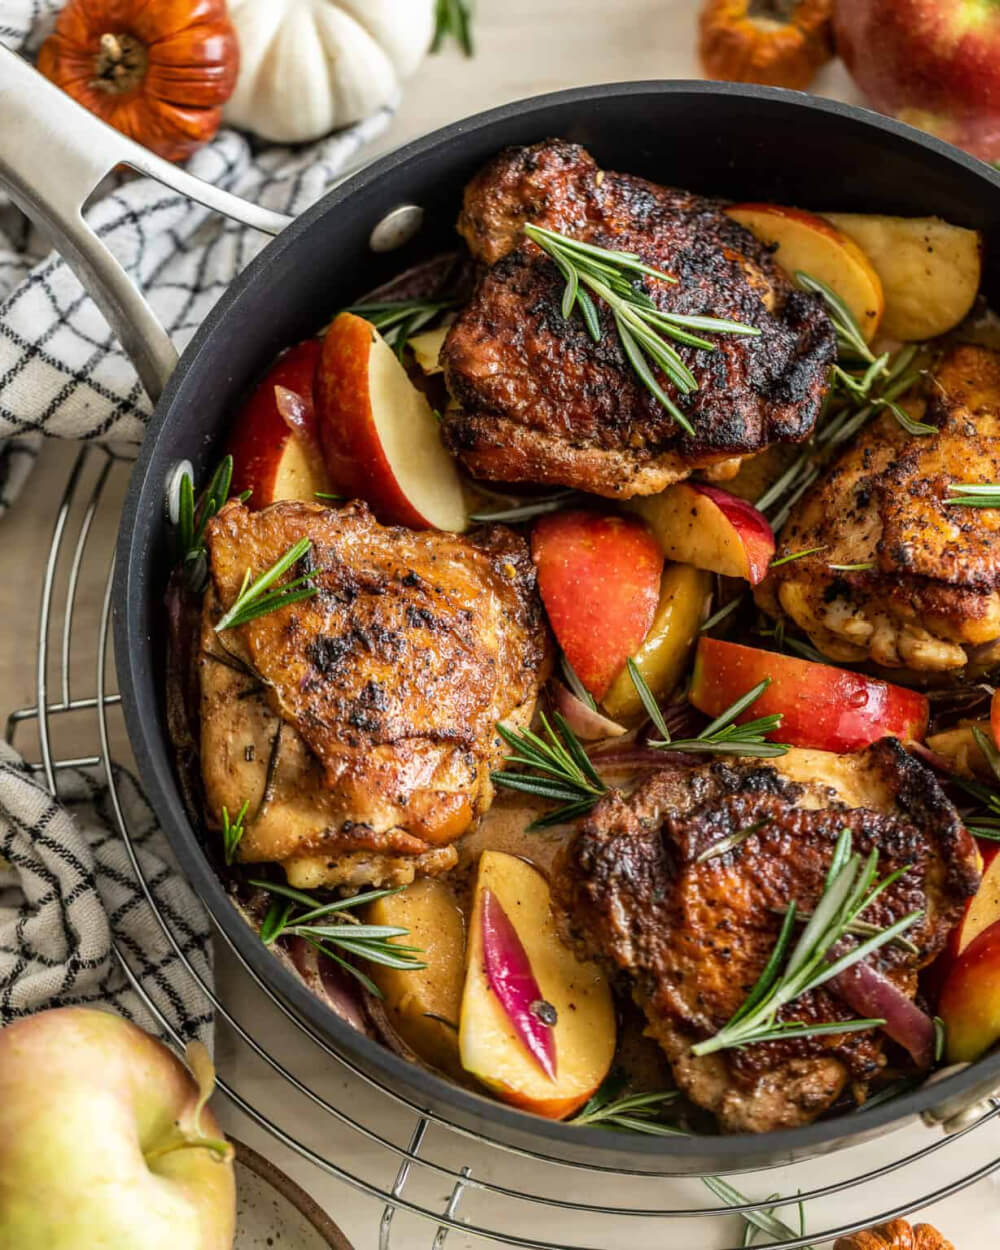 In The Love Of Home Files #2, rosemary apple cider chicken